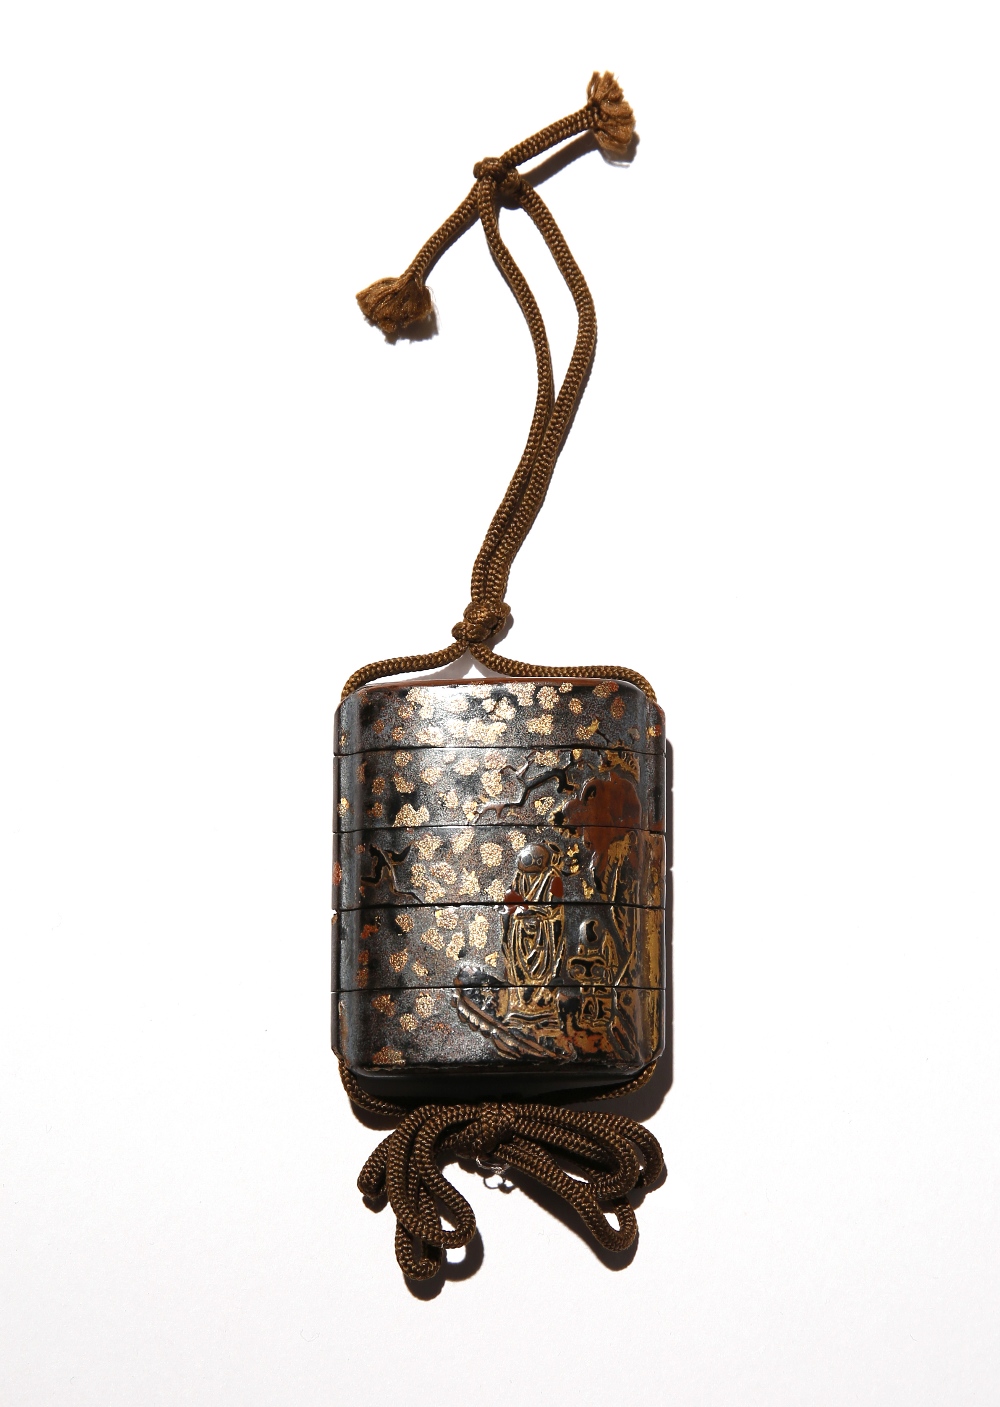 A SMALL JAPANESE FOUR-CASE LACQUERED WOOD INRO EDO PERIOD, 18TH CENTURY Decorated in gold, silver, - Image 2 of 2